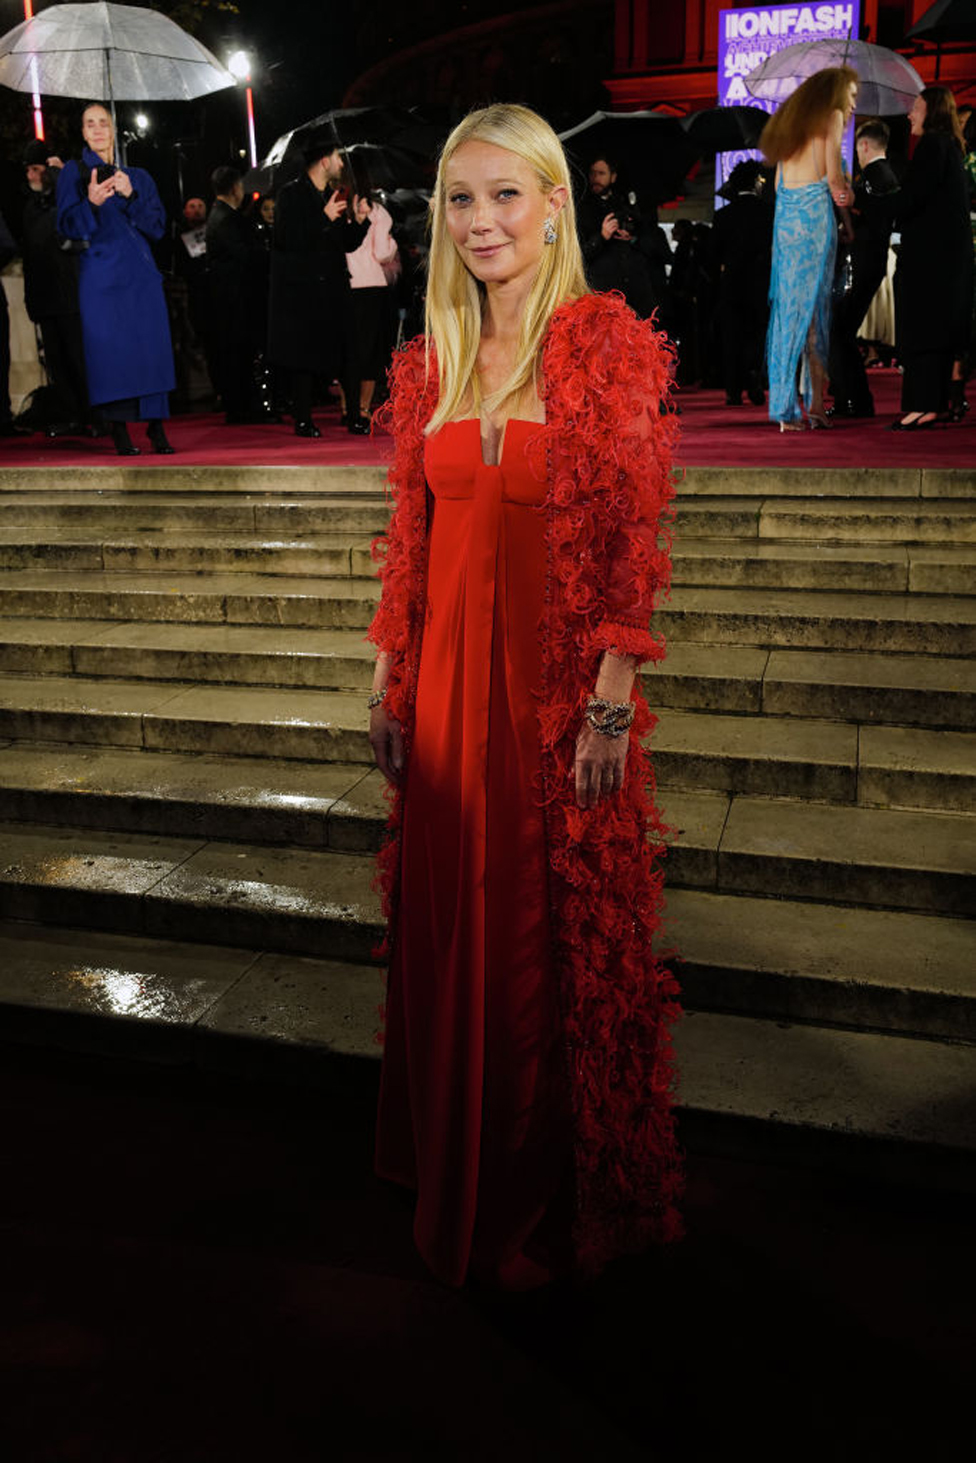 Gwyneth Paltrow attends the Fashion Awards 2023 presented by Pandora on December 04, 2023 in London, England.